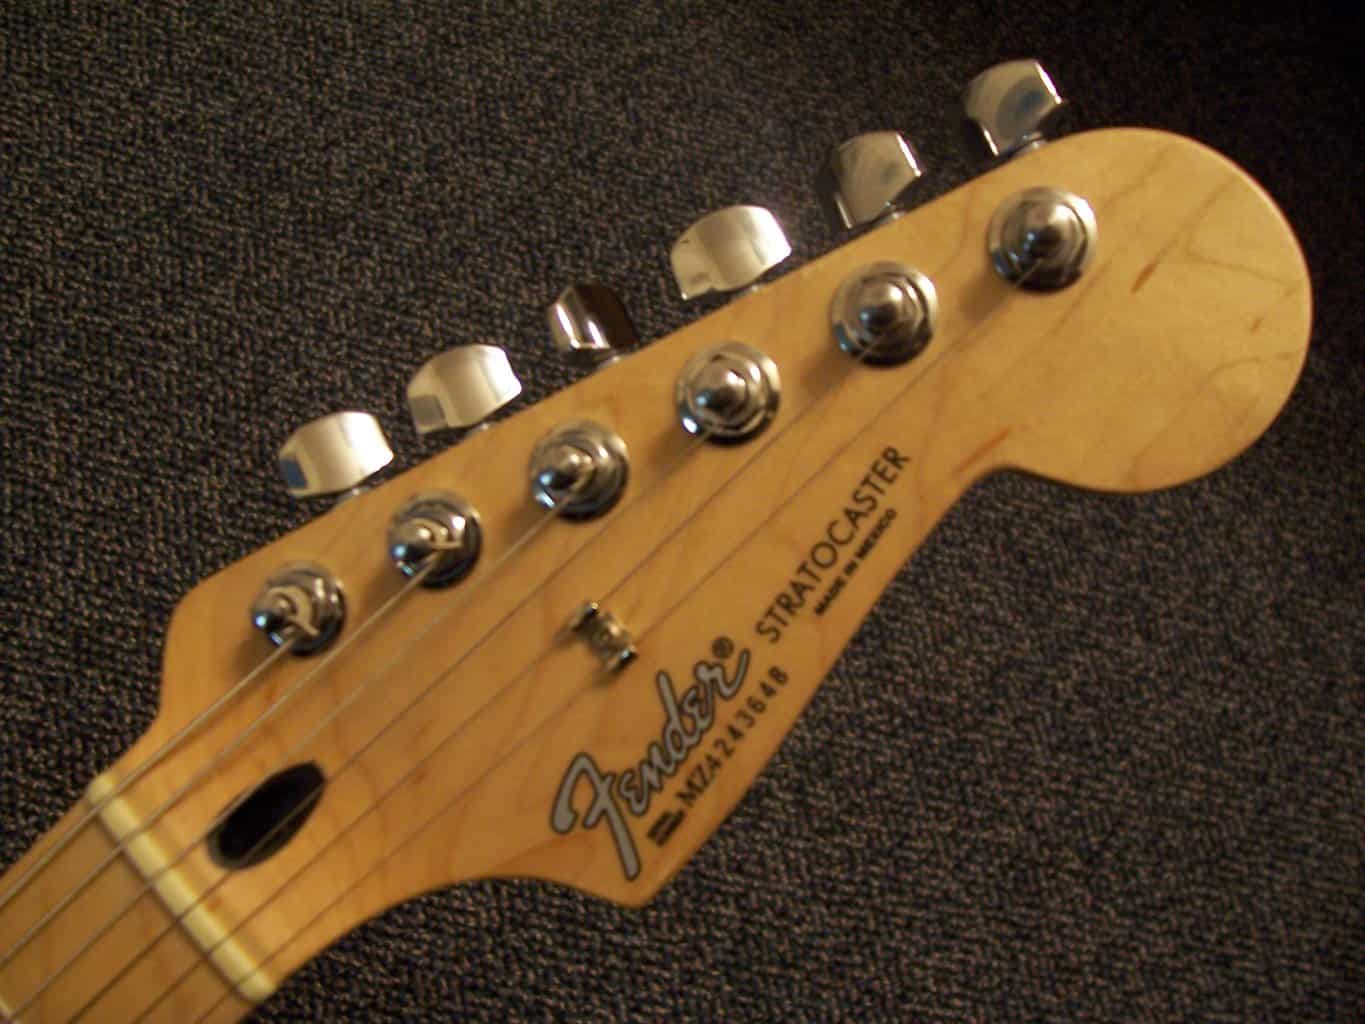 Best locking tuners for a stratocaster